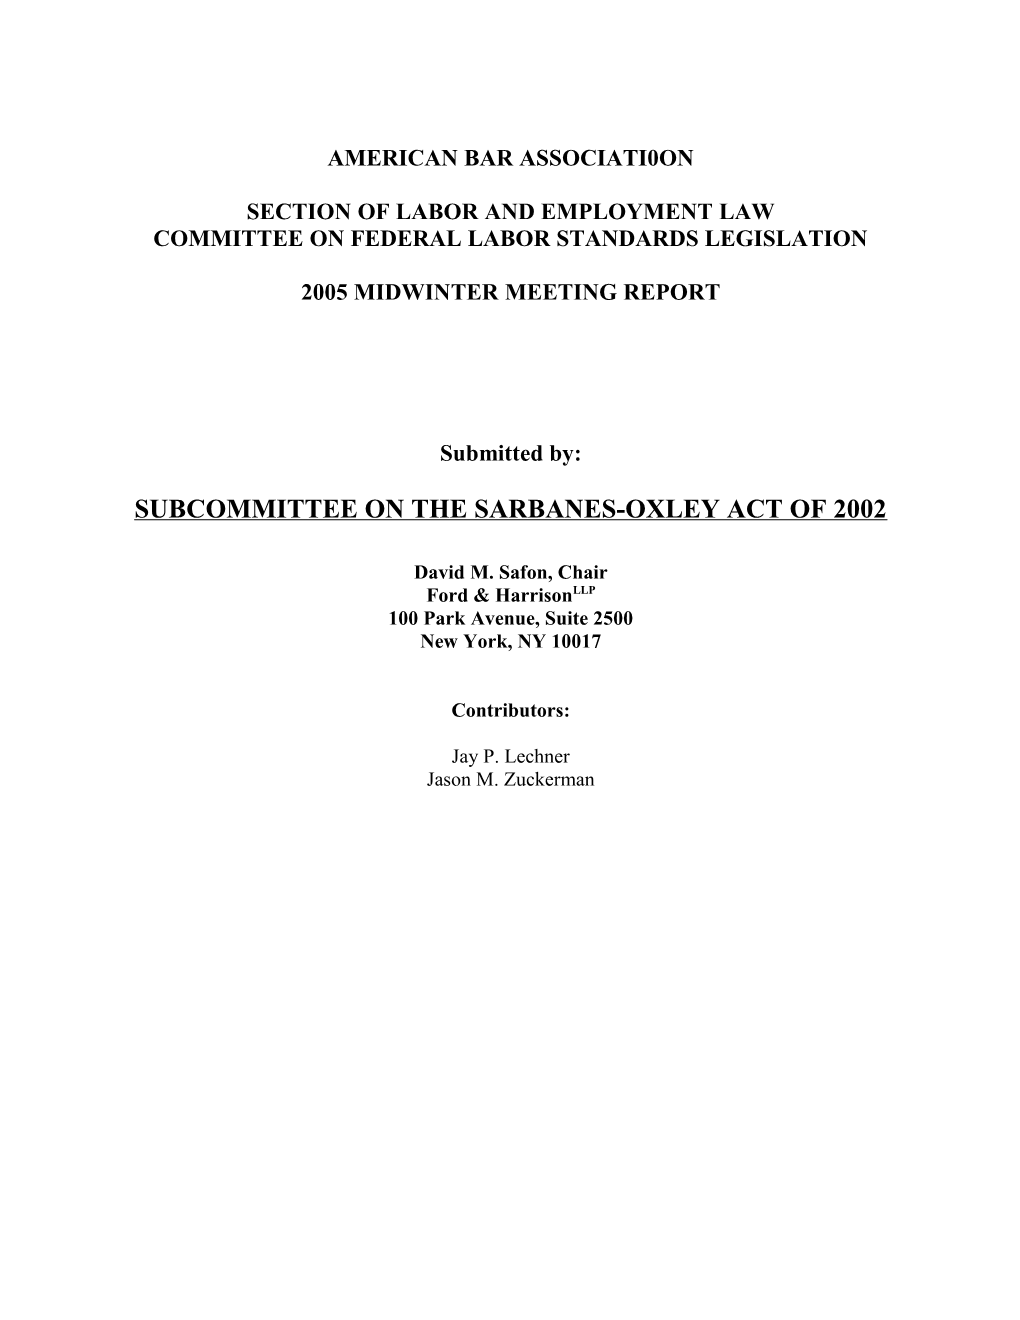 2005 Annual Update on the Whistleblower Provisions of the Sarbanes-Oxley Act of 2002